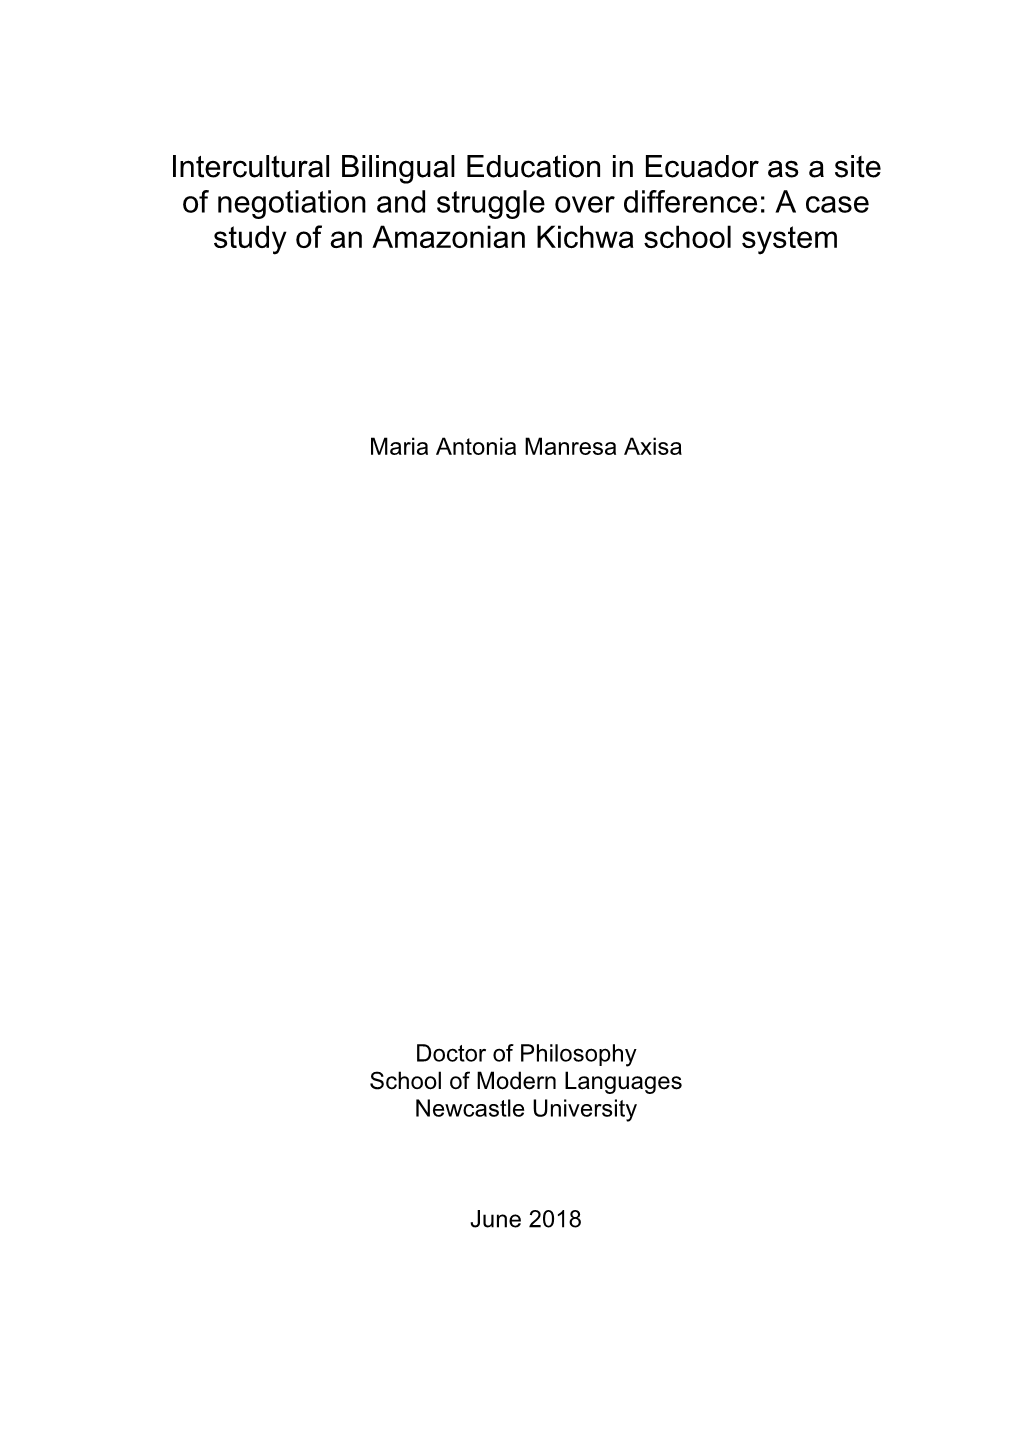 Intercultural Bilingual Education in Ecuador As a Site of Negotiation and Struggle Over Difference: a Case Study of an Amazonian Kichwa School System